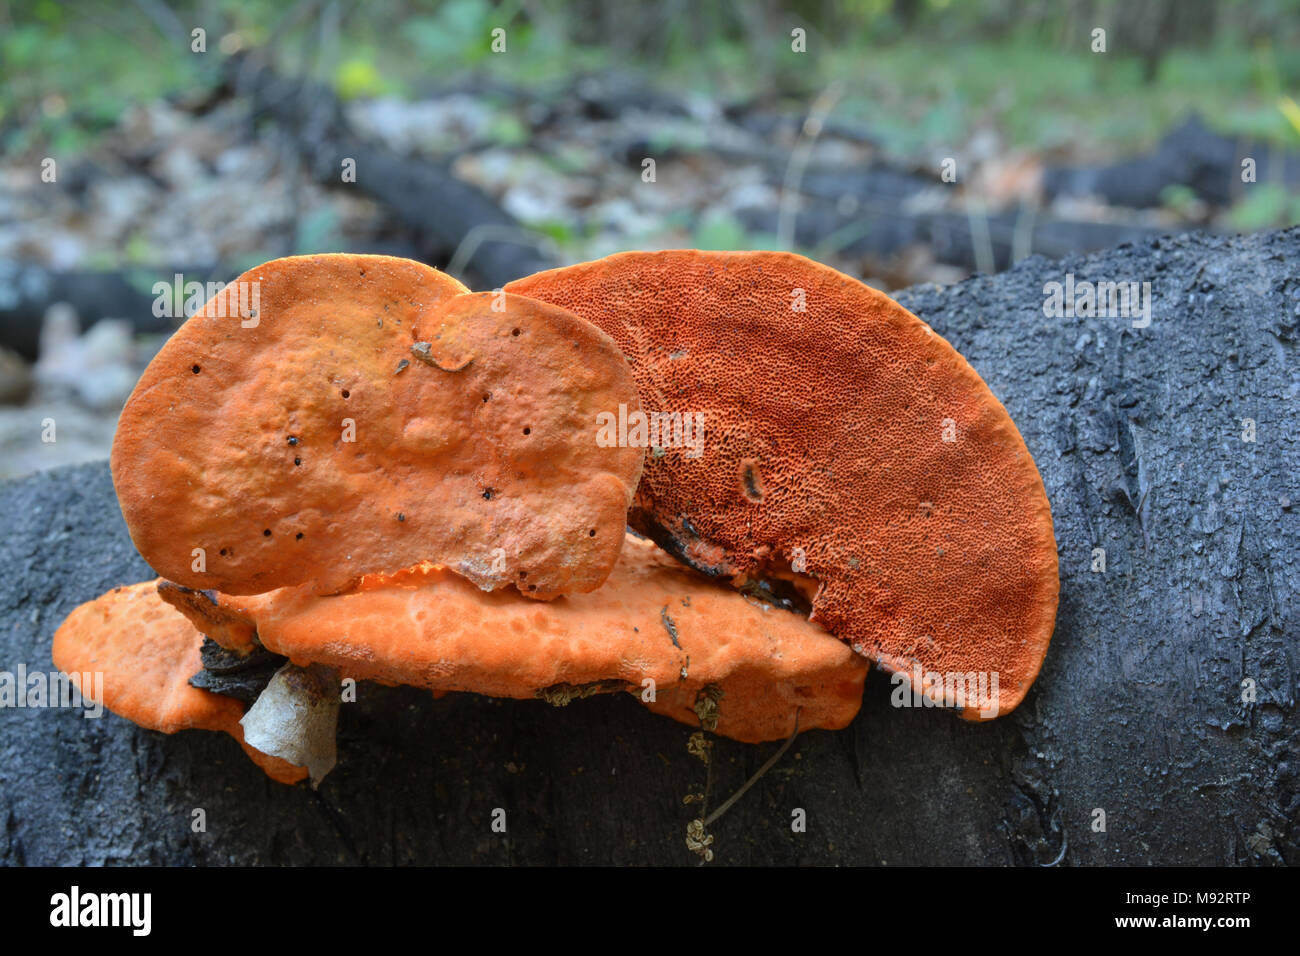 Pycnoporus cinnabarinus, also known as the Cinnabar polypore mushroom, saprophytic, white-rot decomposerin a forest on a rotten stump Stock Photo